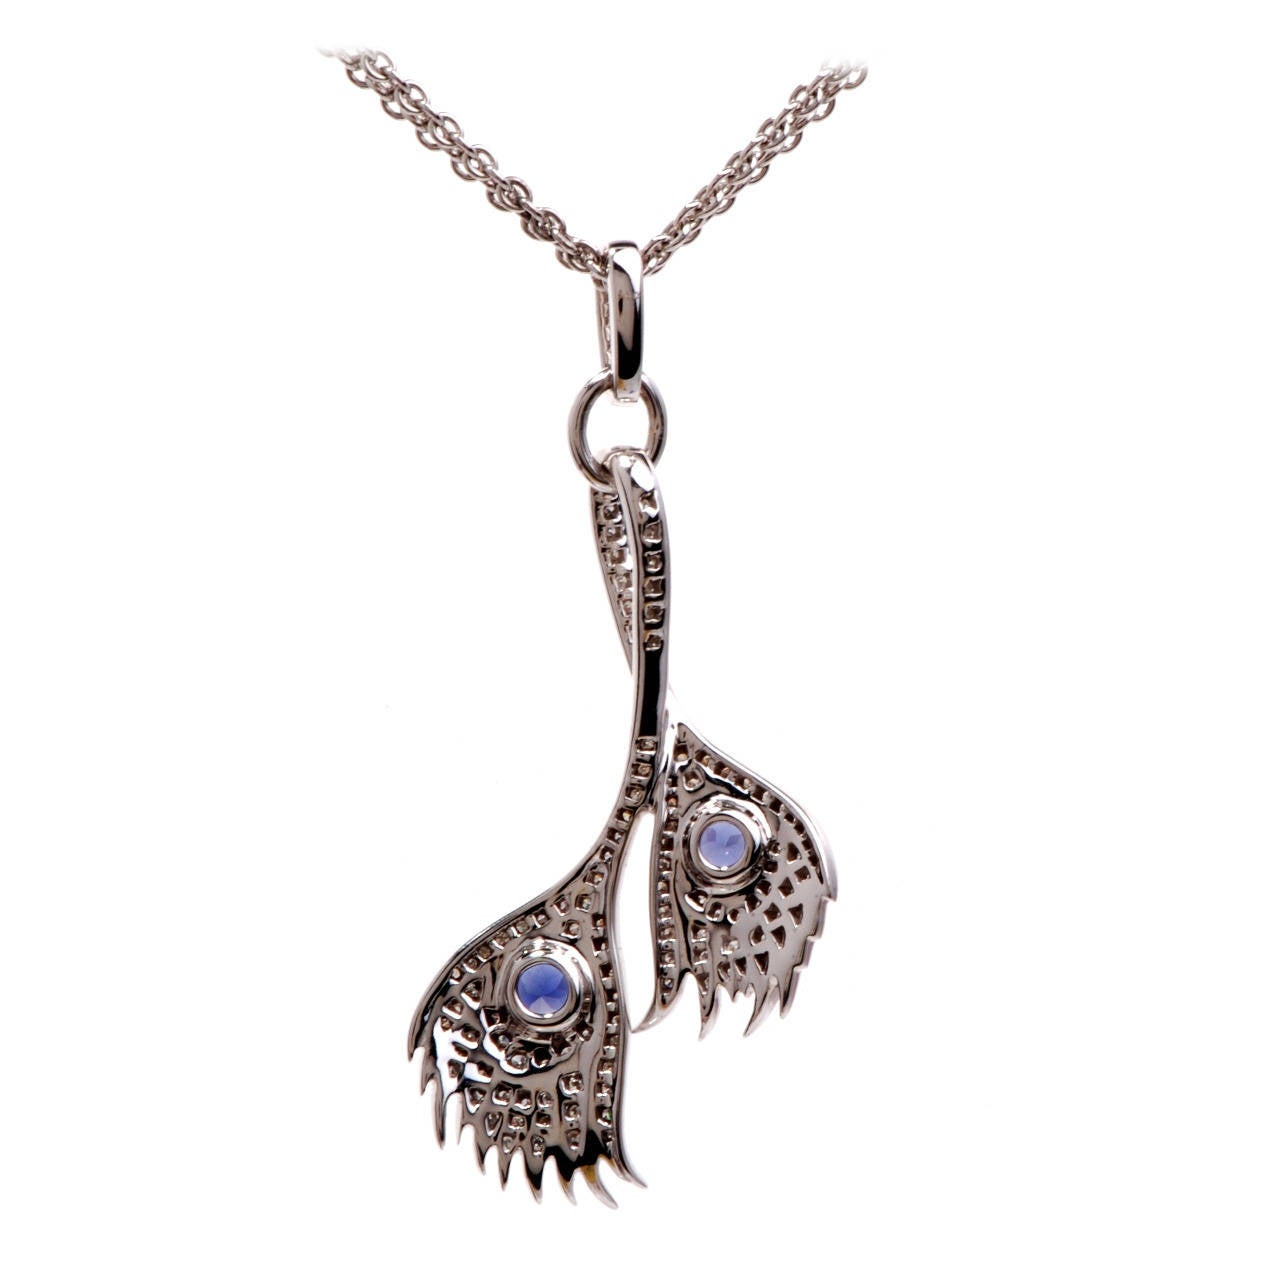 This lovely, 100% Original Carrera Carrera Peacock Pendant Necklace is crafted in solid 18K white gold. This pendant features a lovely peacock feather design with 2 genuine bezel set round tanzanite approx. 1.50 cttw and close to 100 beautifull